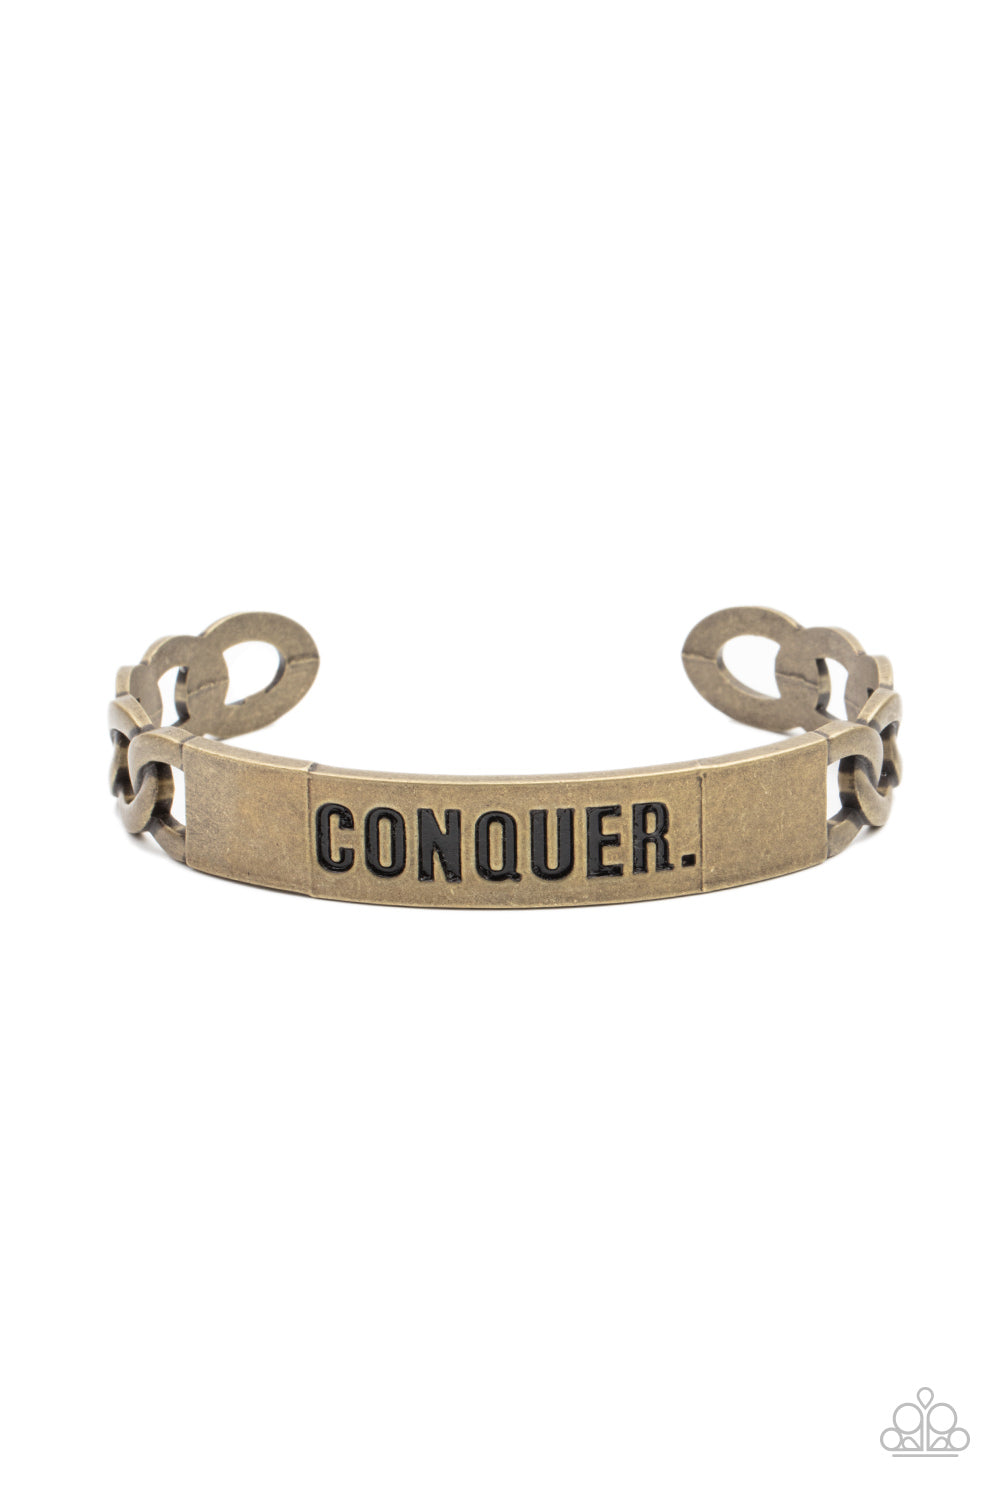 Conquer Your Fears - Brass cuff bracelet B071